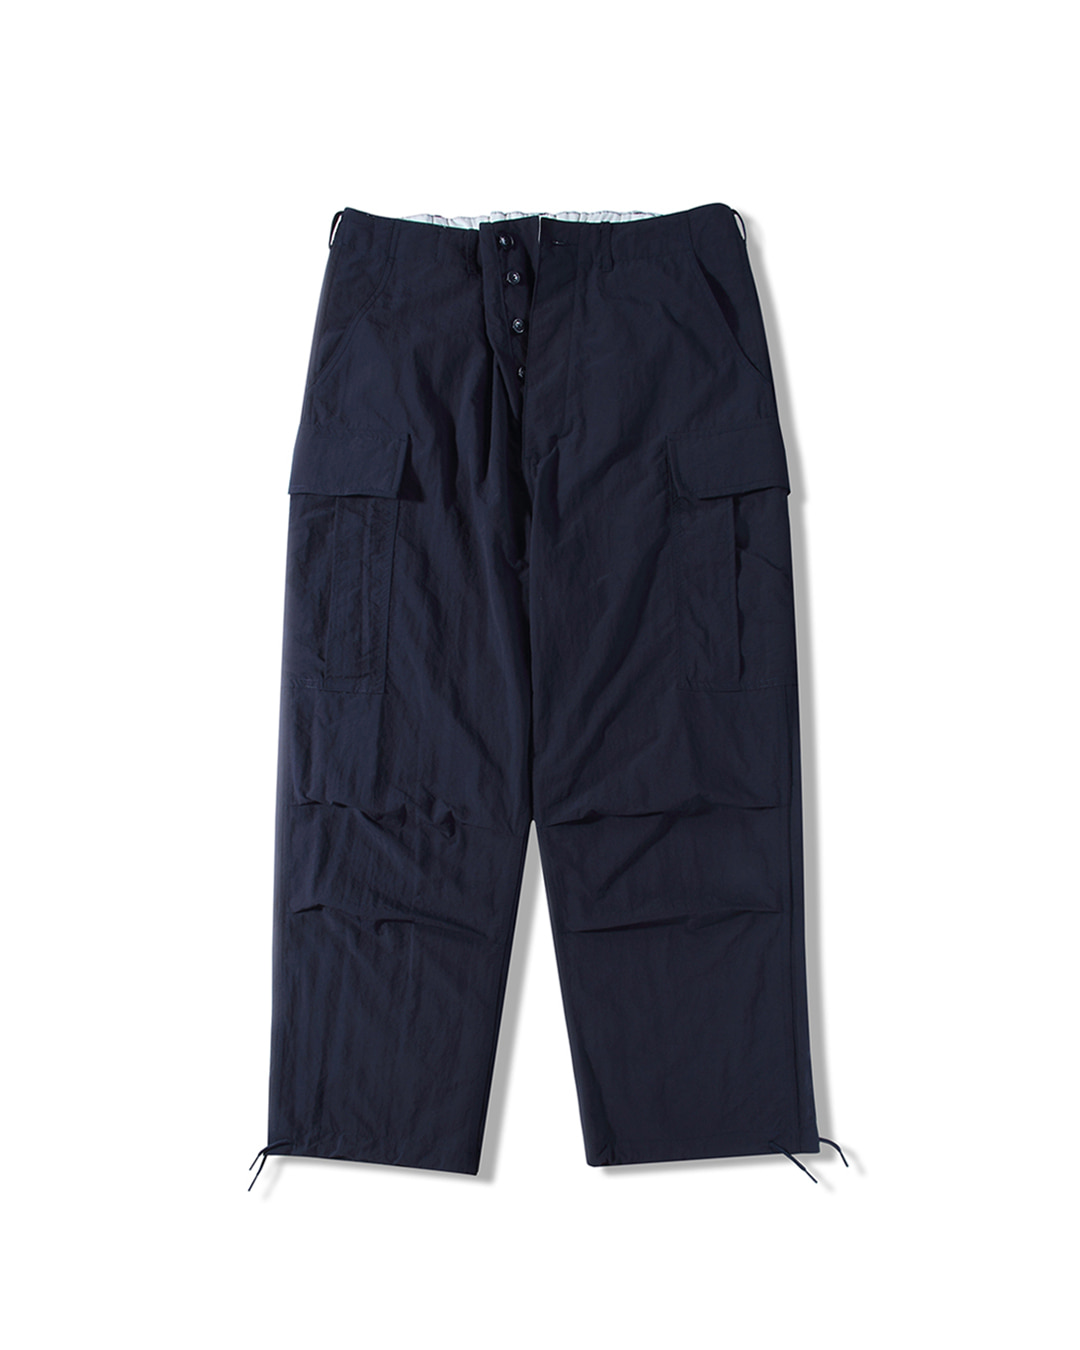 M-51 TROUSERS (navy)